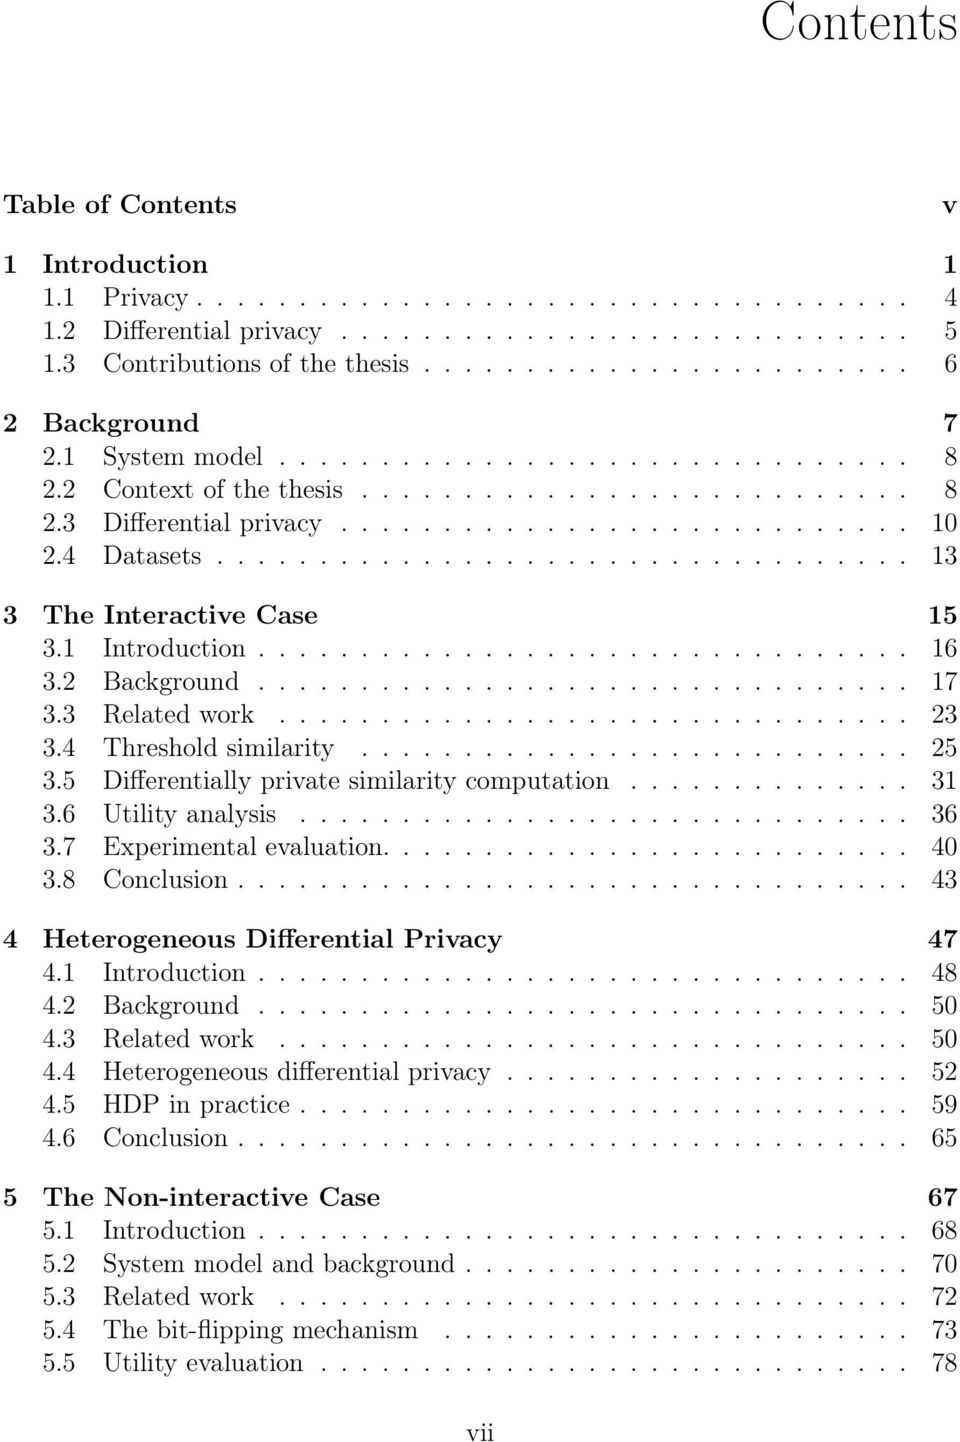 analysis 36 37 Experimental evaluation 40 38 Conclusion 43 4 Heterogeneous Differential Privacy 47 41 Introduction 48 42 Background 50 43 Related work 50 44 Heterogeneous differential privacy 52